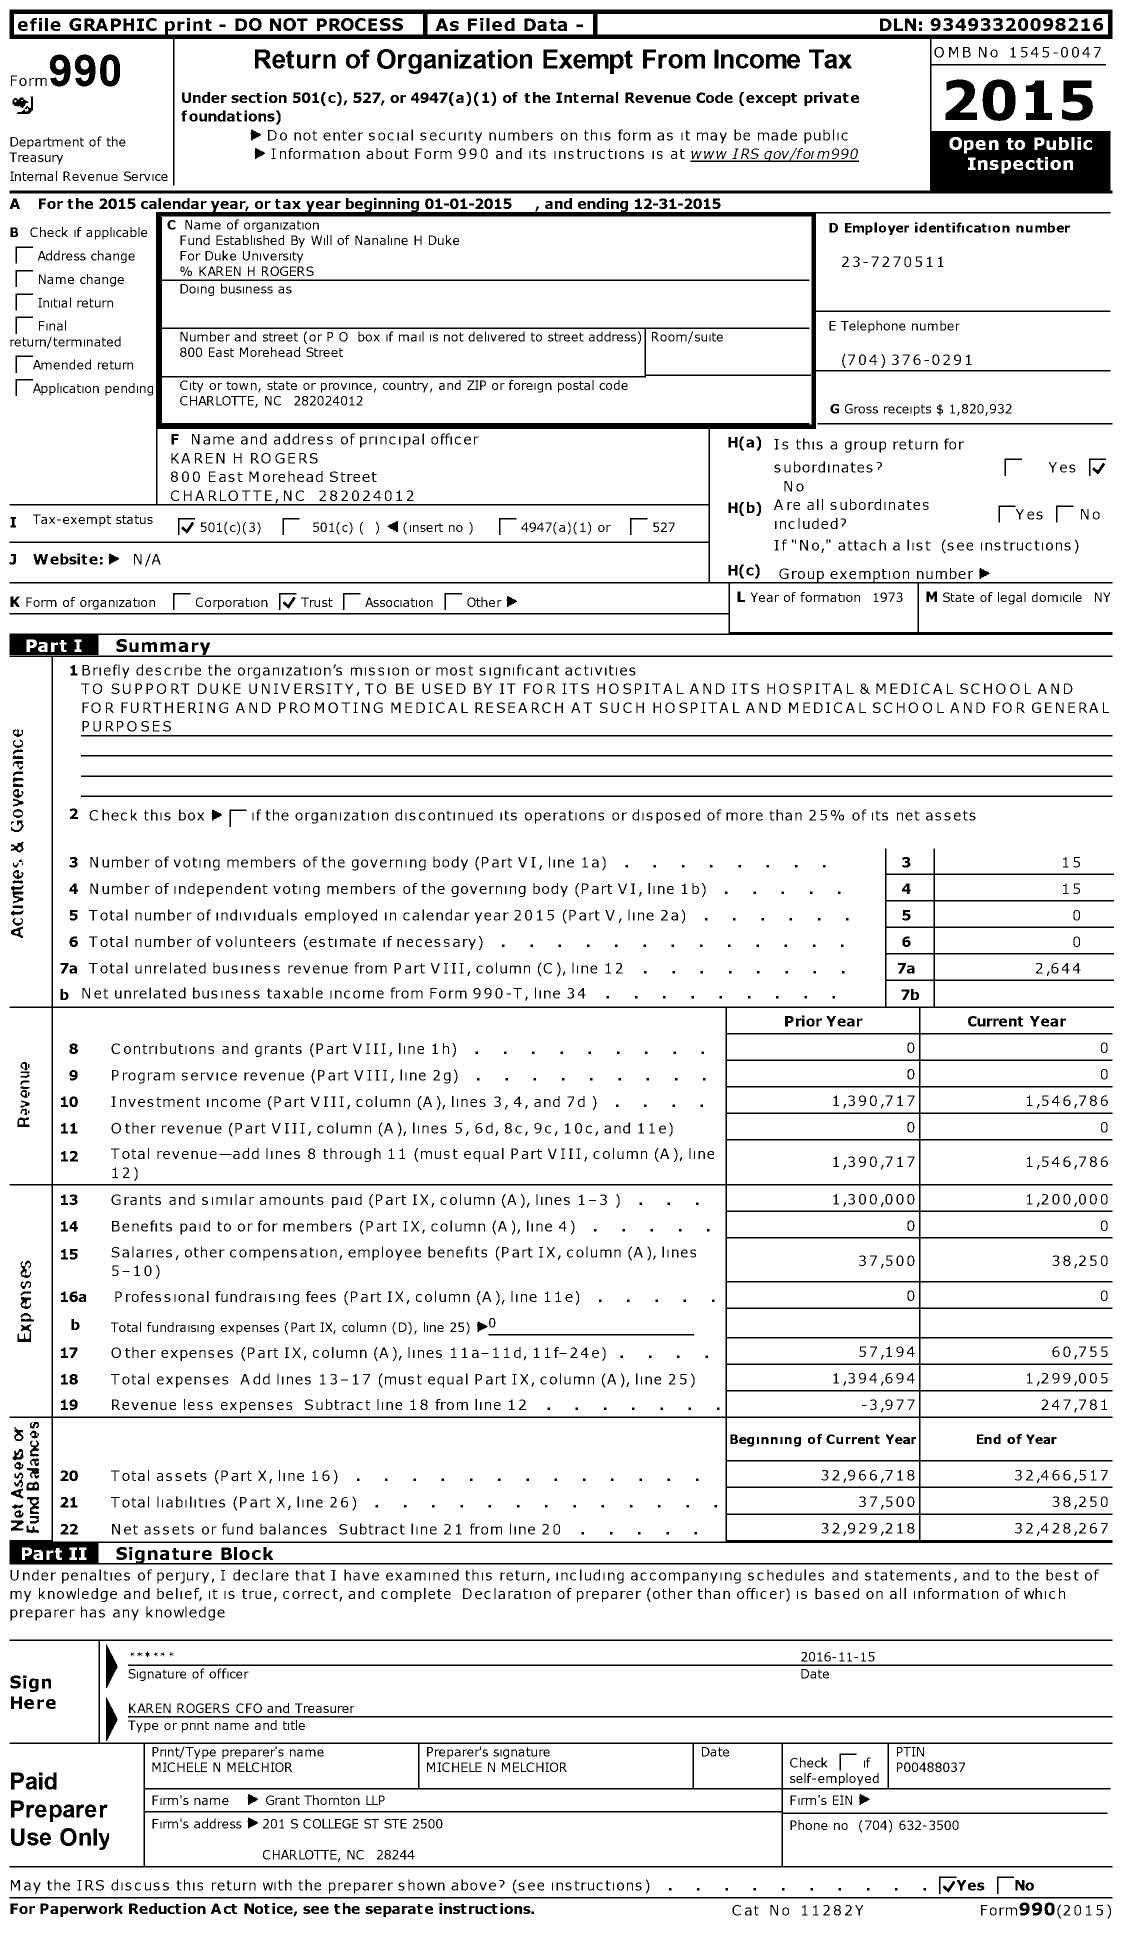 Image of first page of 2015 Form 990 for Fund Established By Will of Nanaline H Duke For Duke University